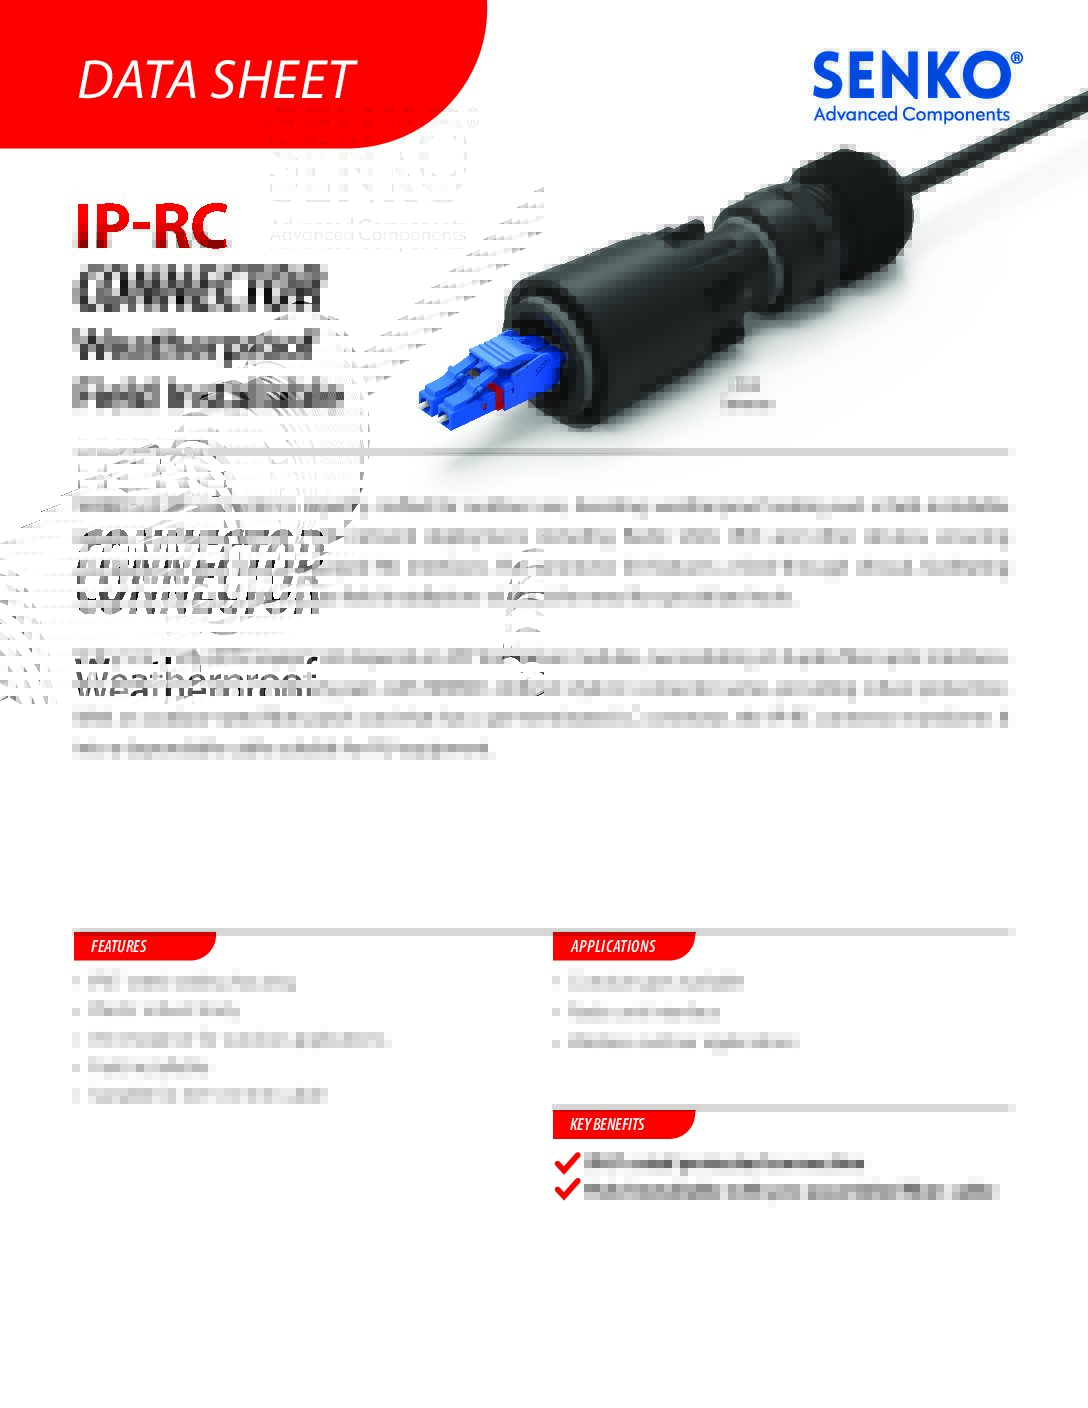 Data-Sheet_IP-RC-Connector